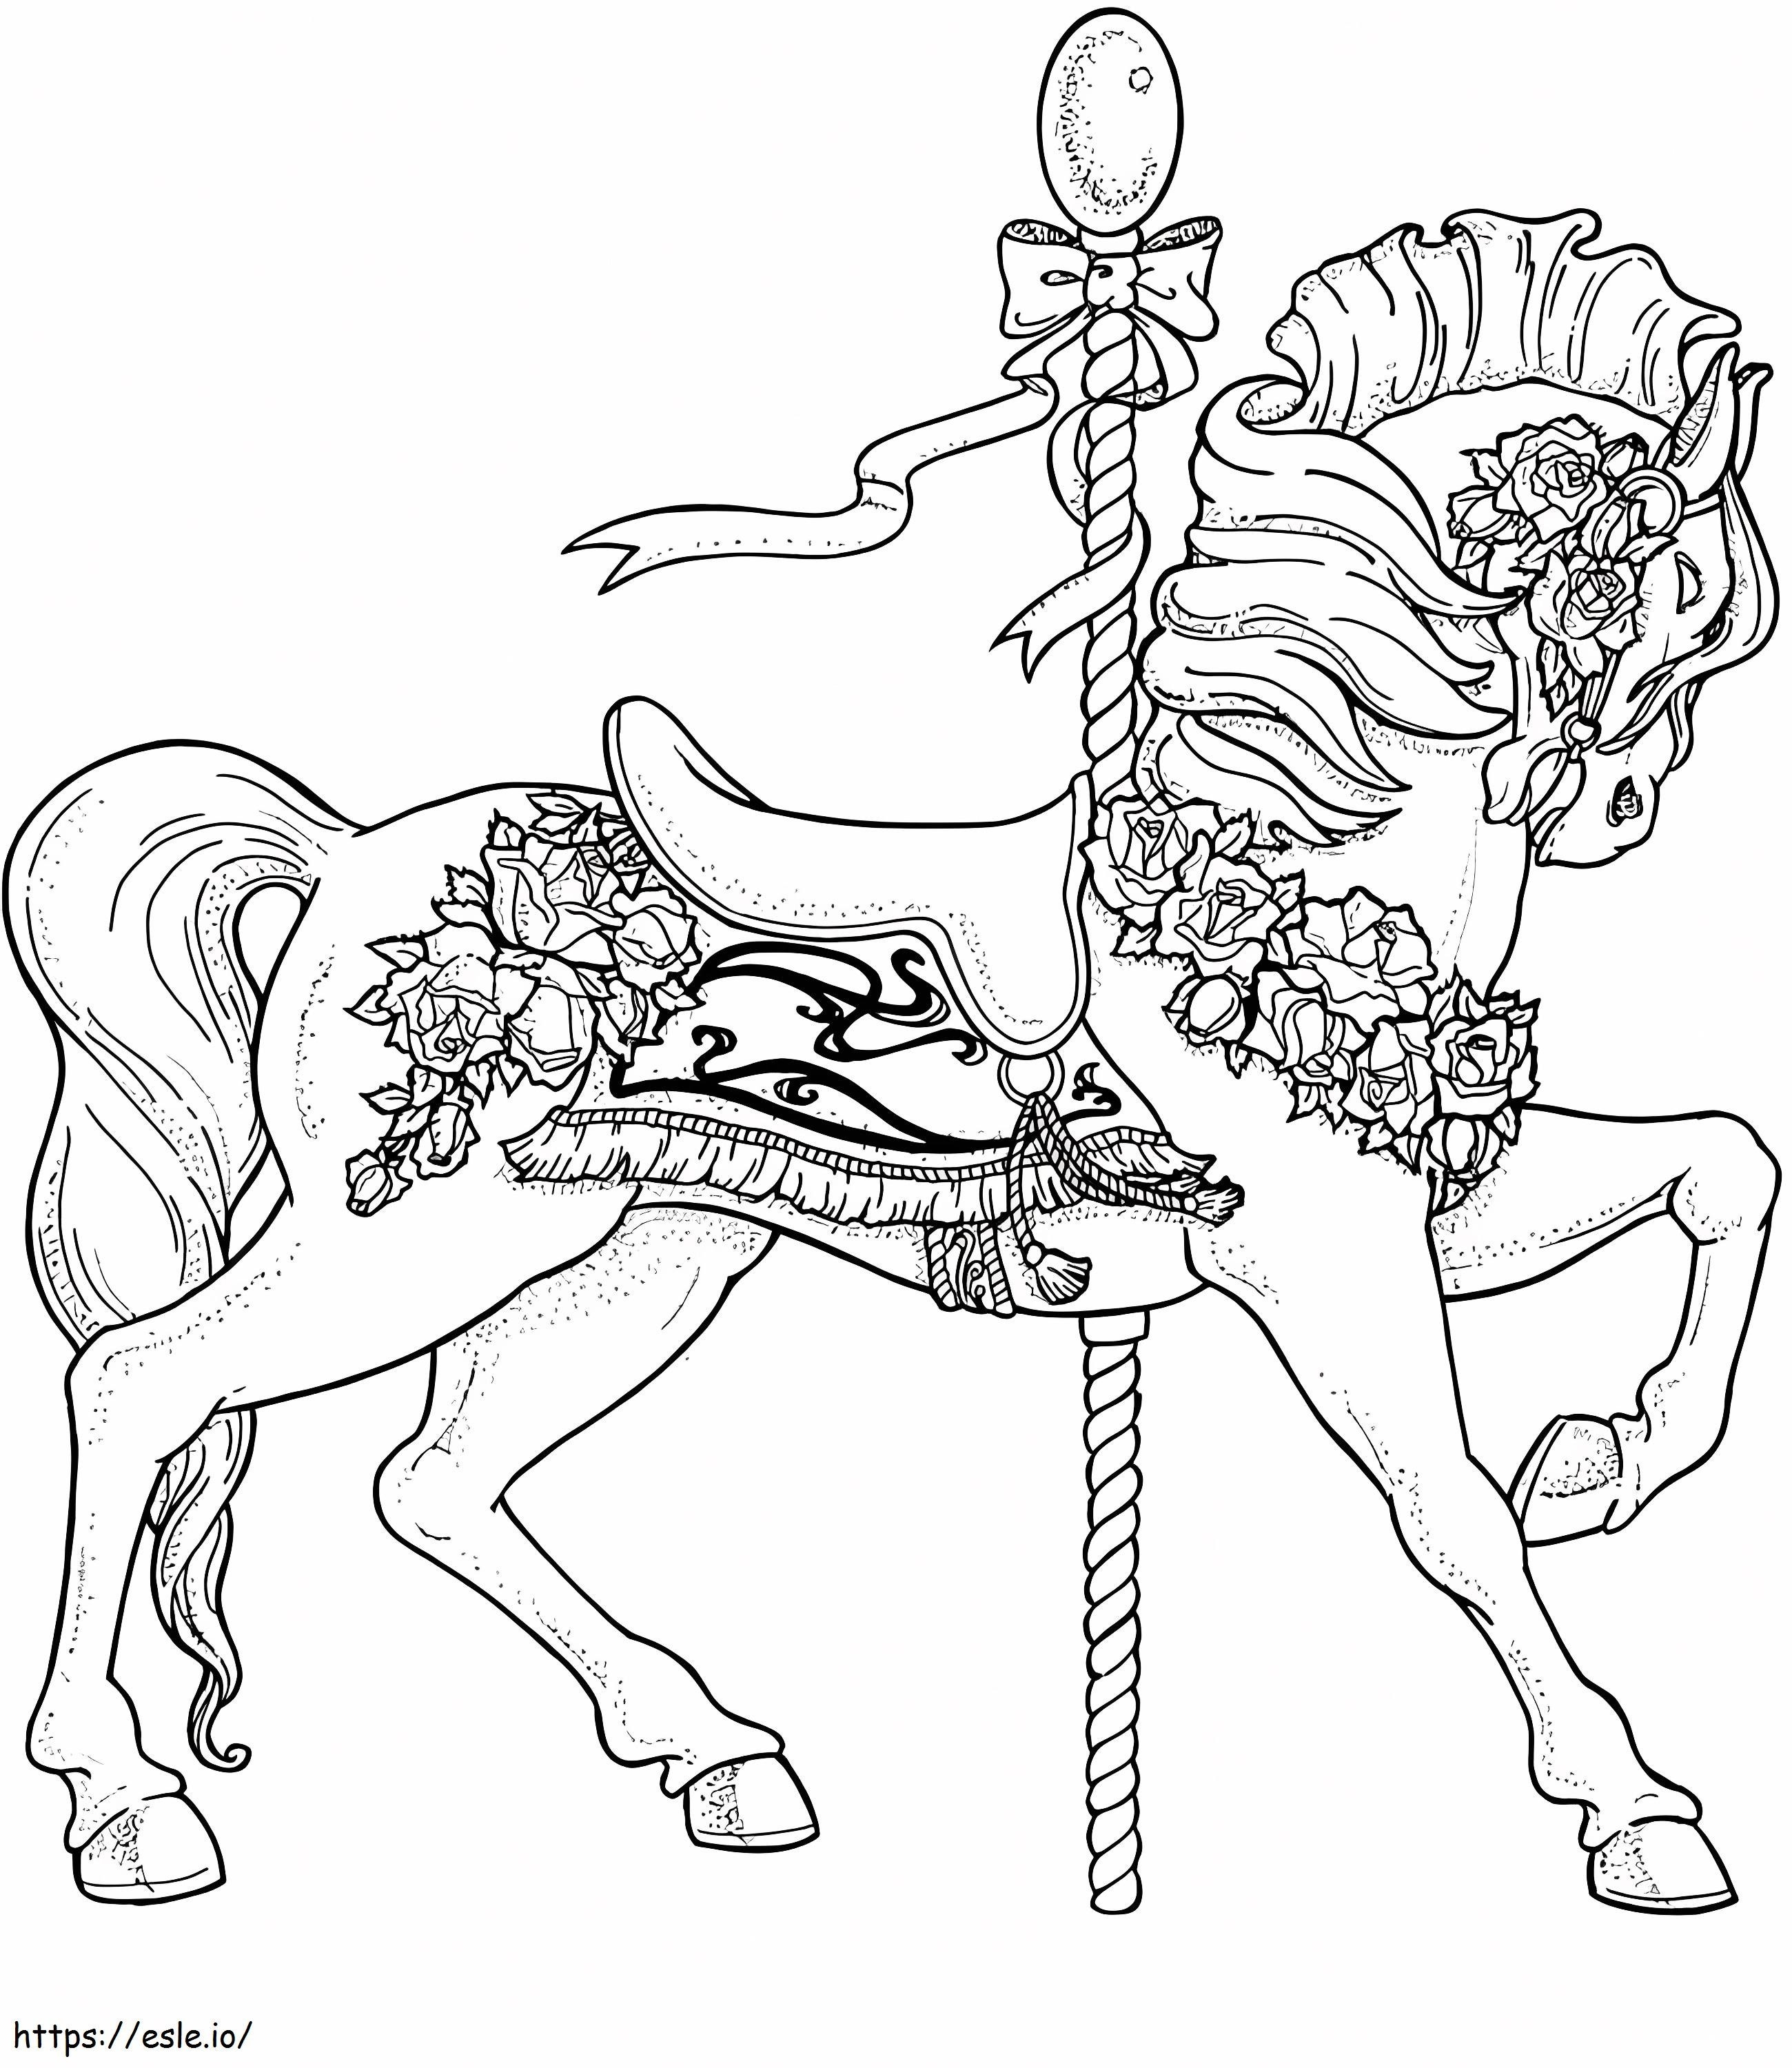 Printable Carousel Horse coloring page